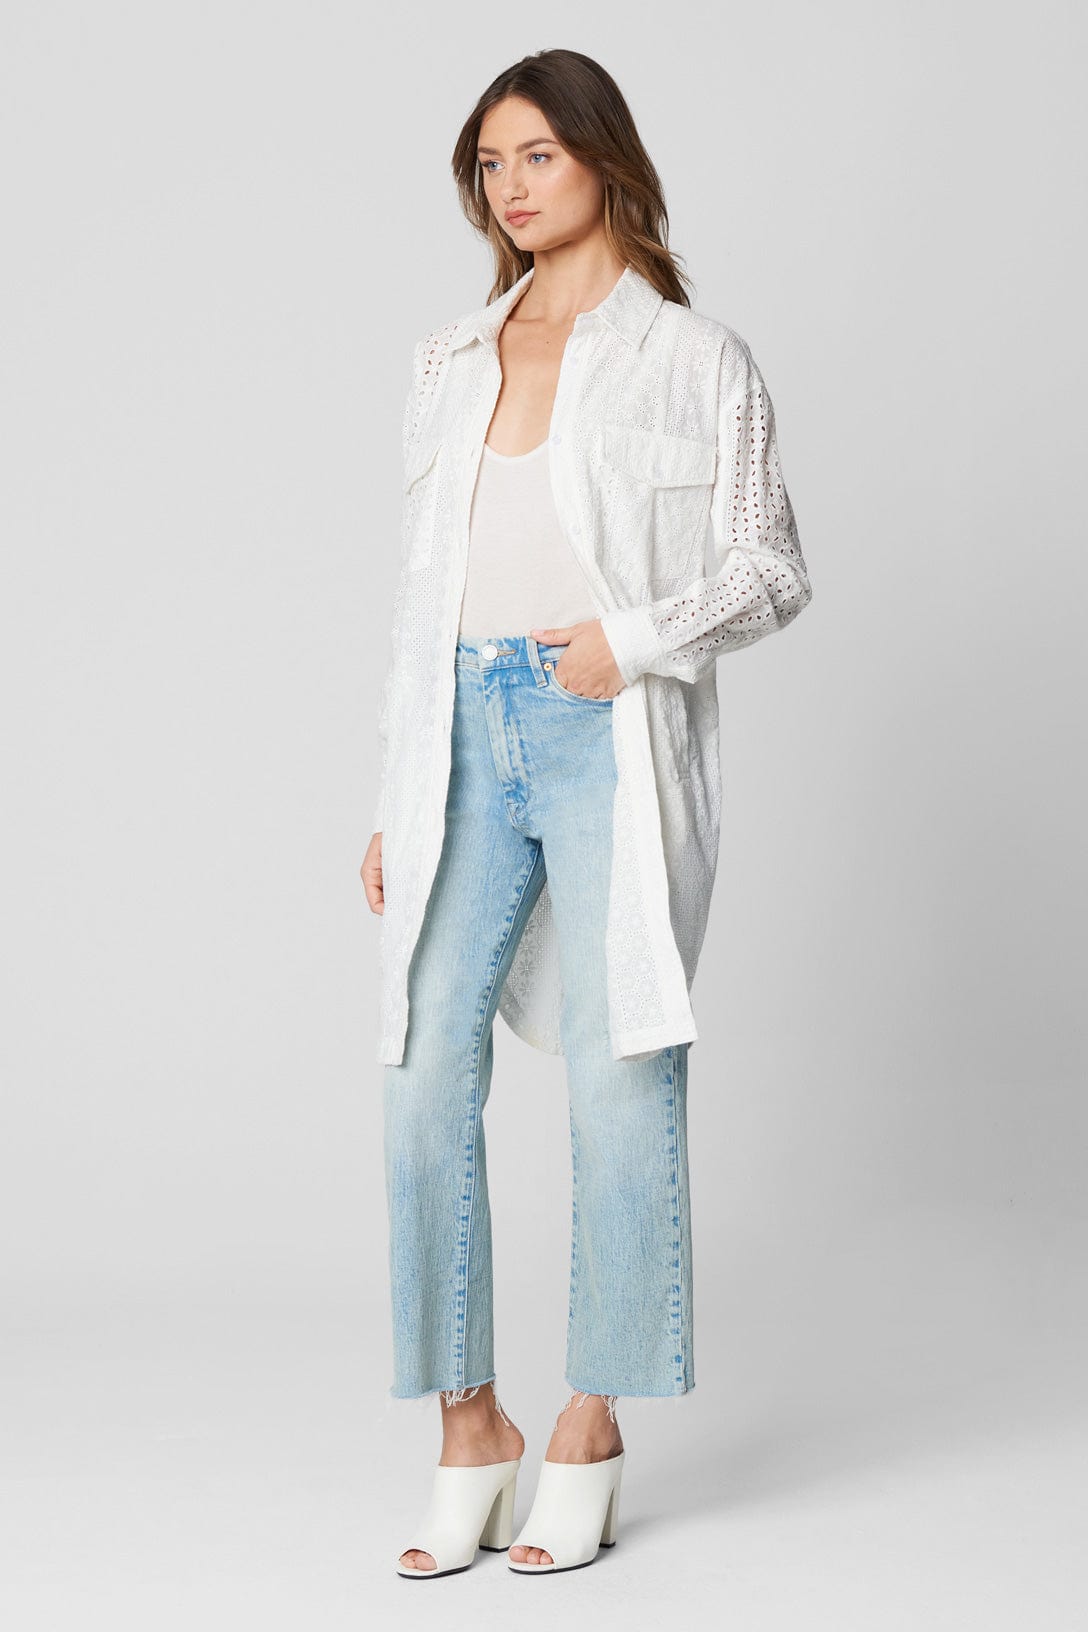 Downtown Vibes Top White, Tops Blouses by Blank NYC | LIT Boutique